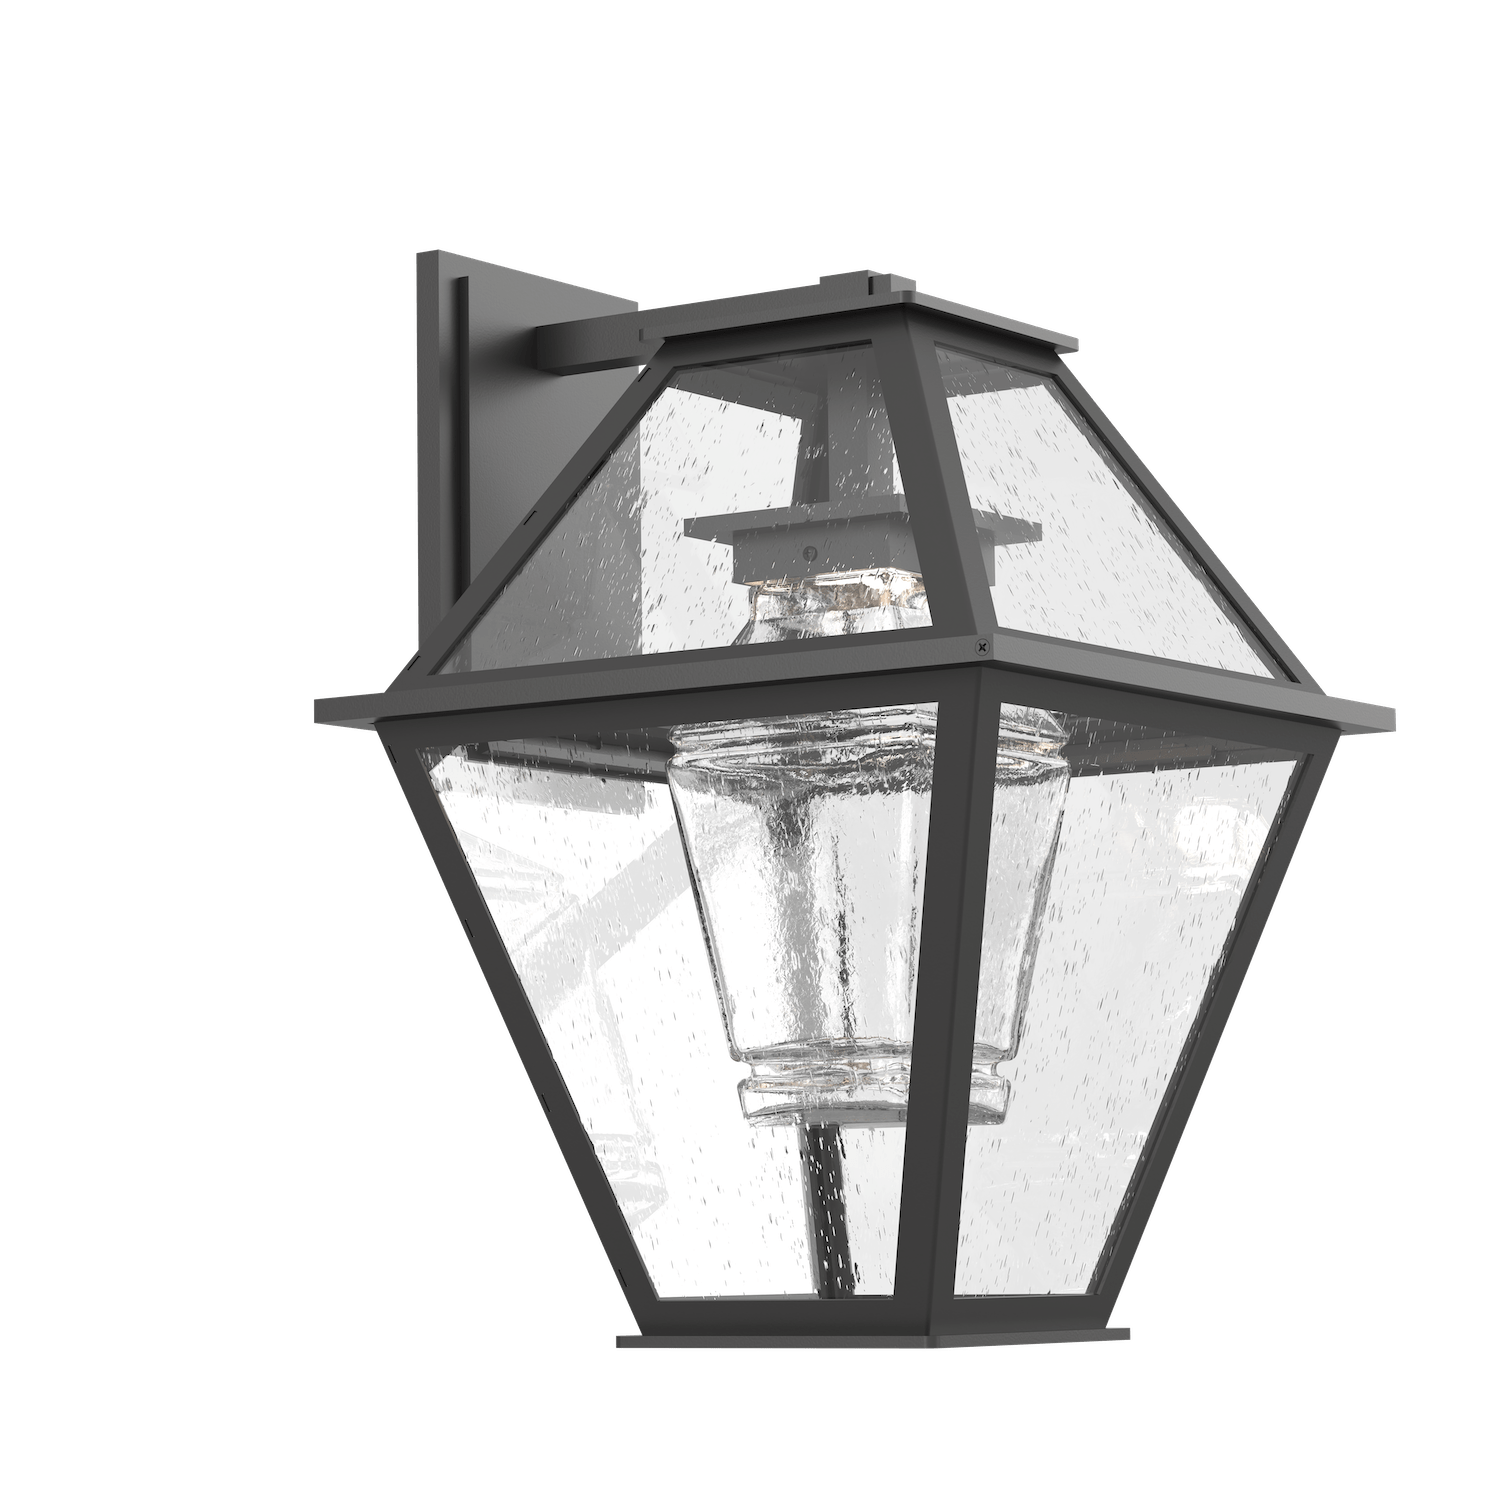 ODB0072-03-AG-CC-Hammerton-Studio-Terrace-24-inch-outdoor-nested-lantern-with-argento-grey-finish-and-clear-glass-shade-and-LED-lamping